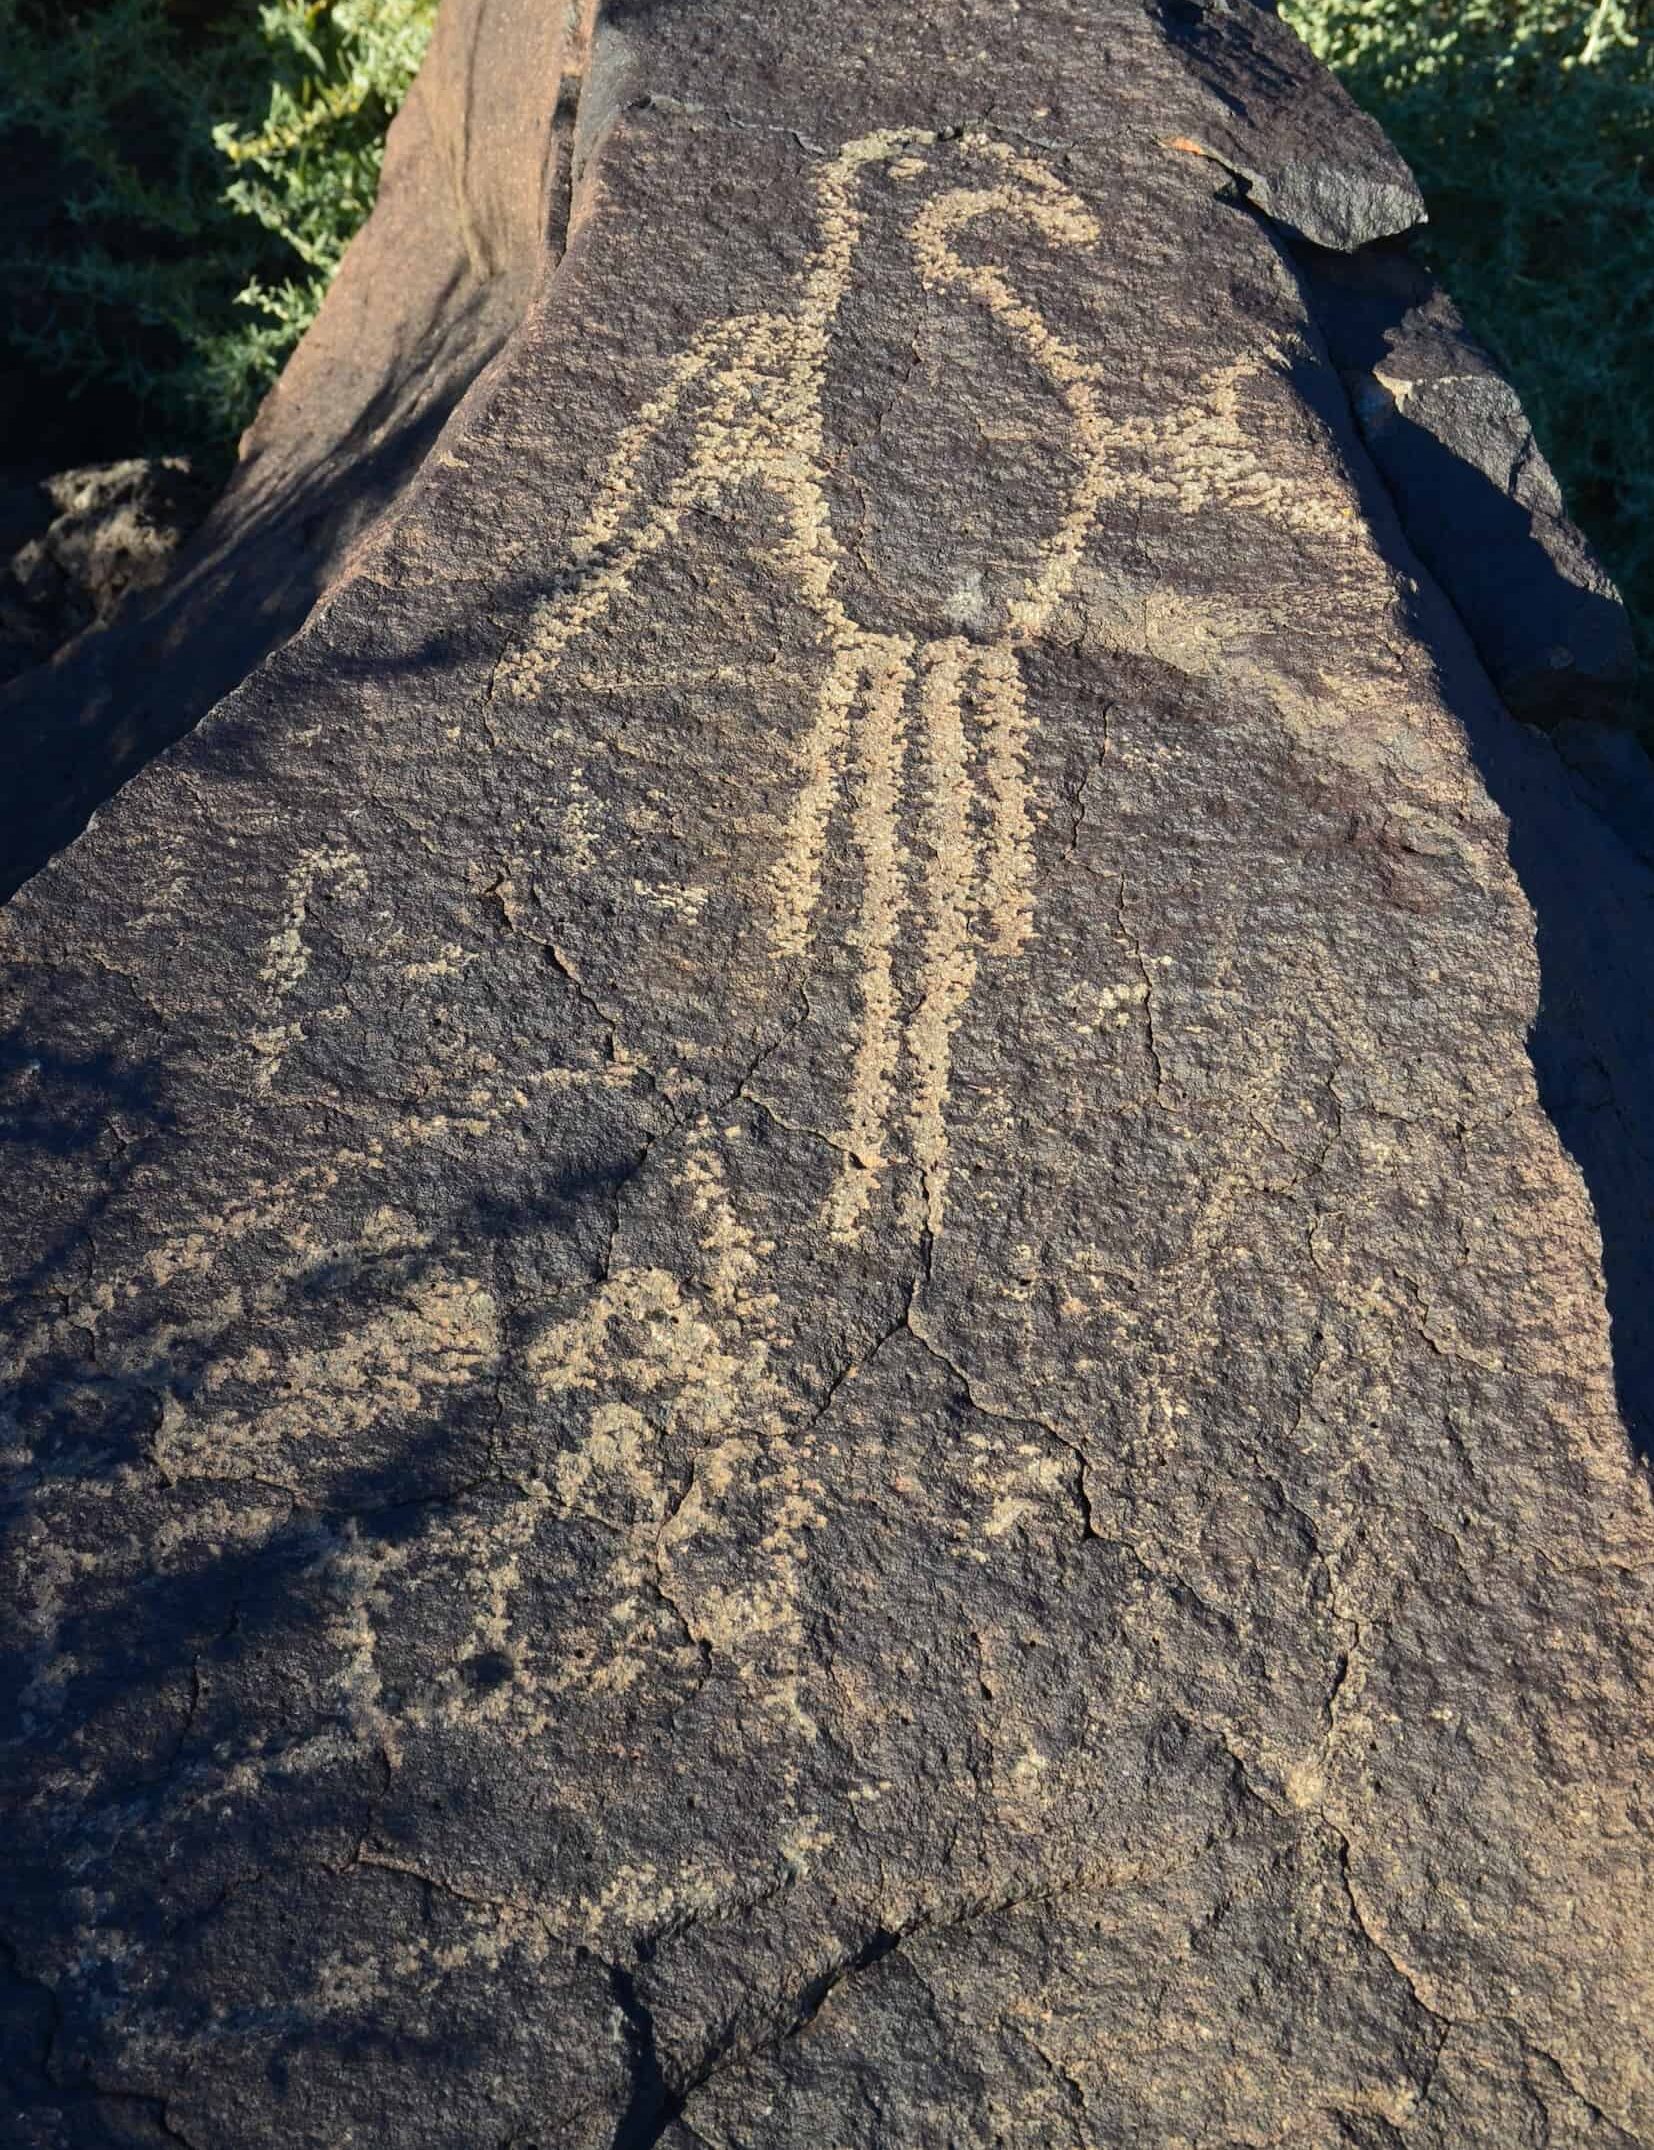 Macaw petroglyph along the Macaw Trail at Boca Negra Canyon, Petroglyph National Monument in Albuquerque, New Mexico